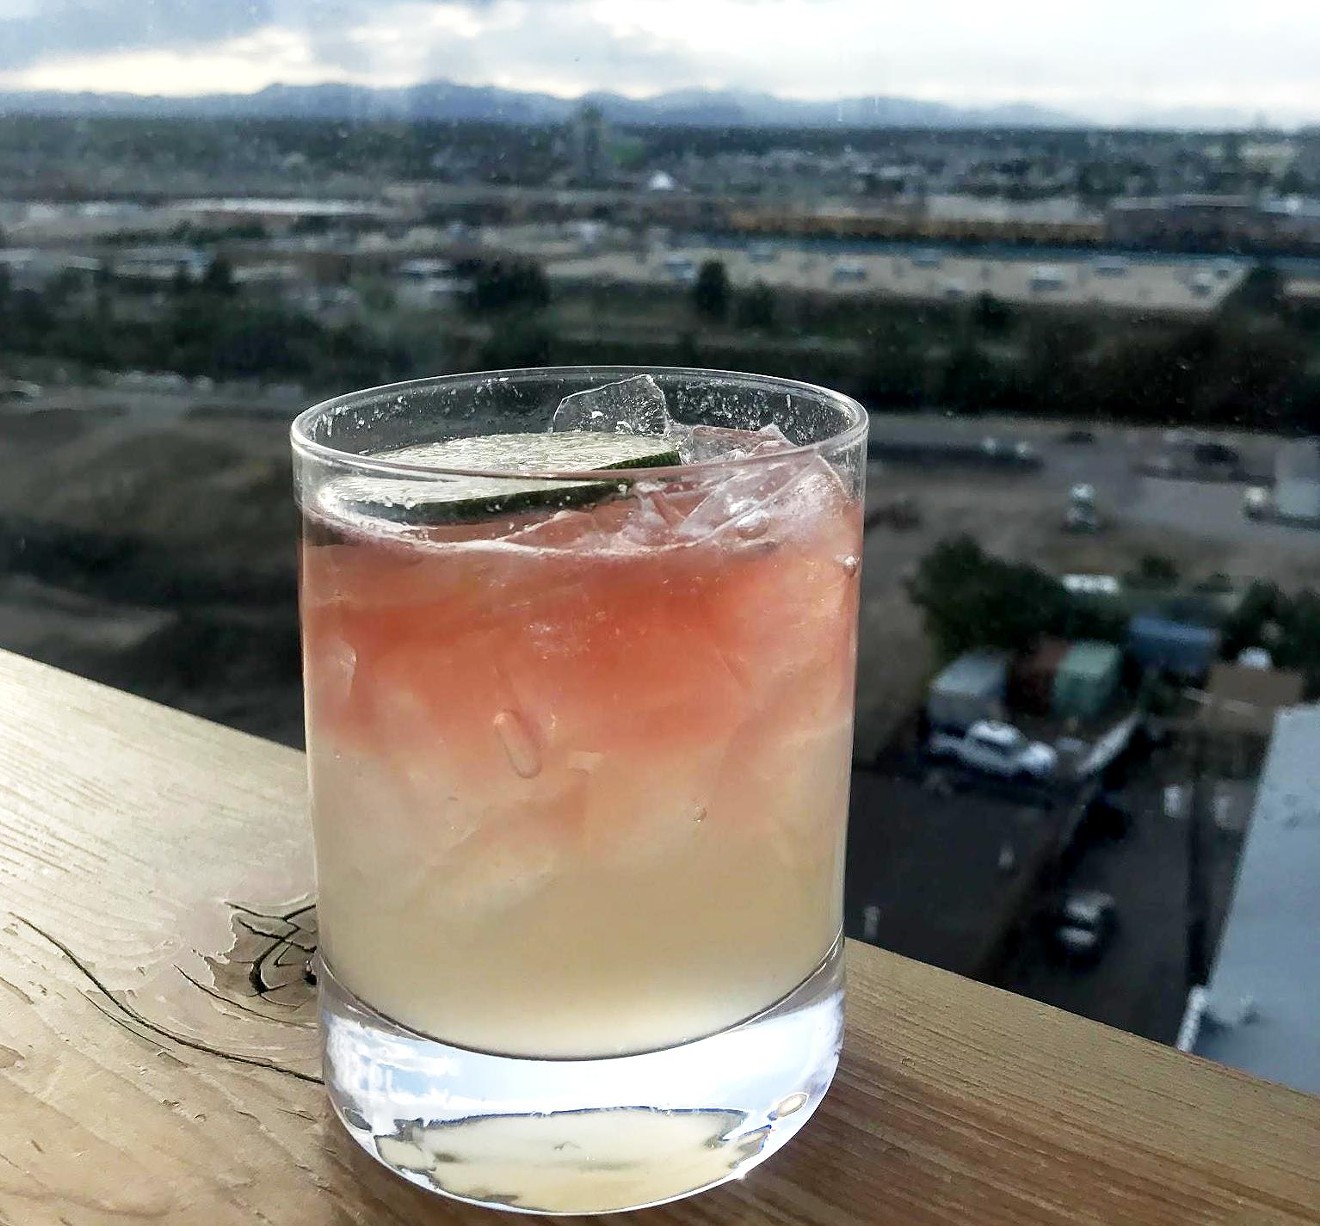 Cocktails with a view — that's the upside of The Woods.